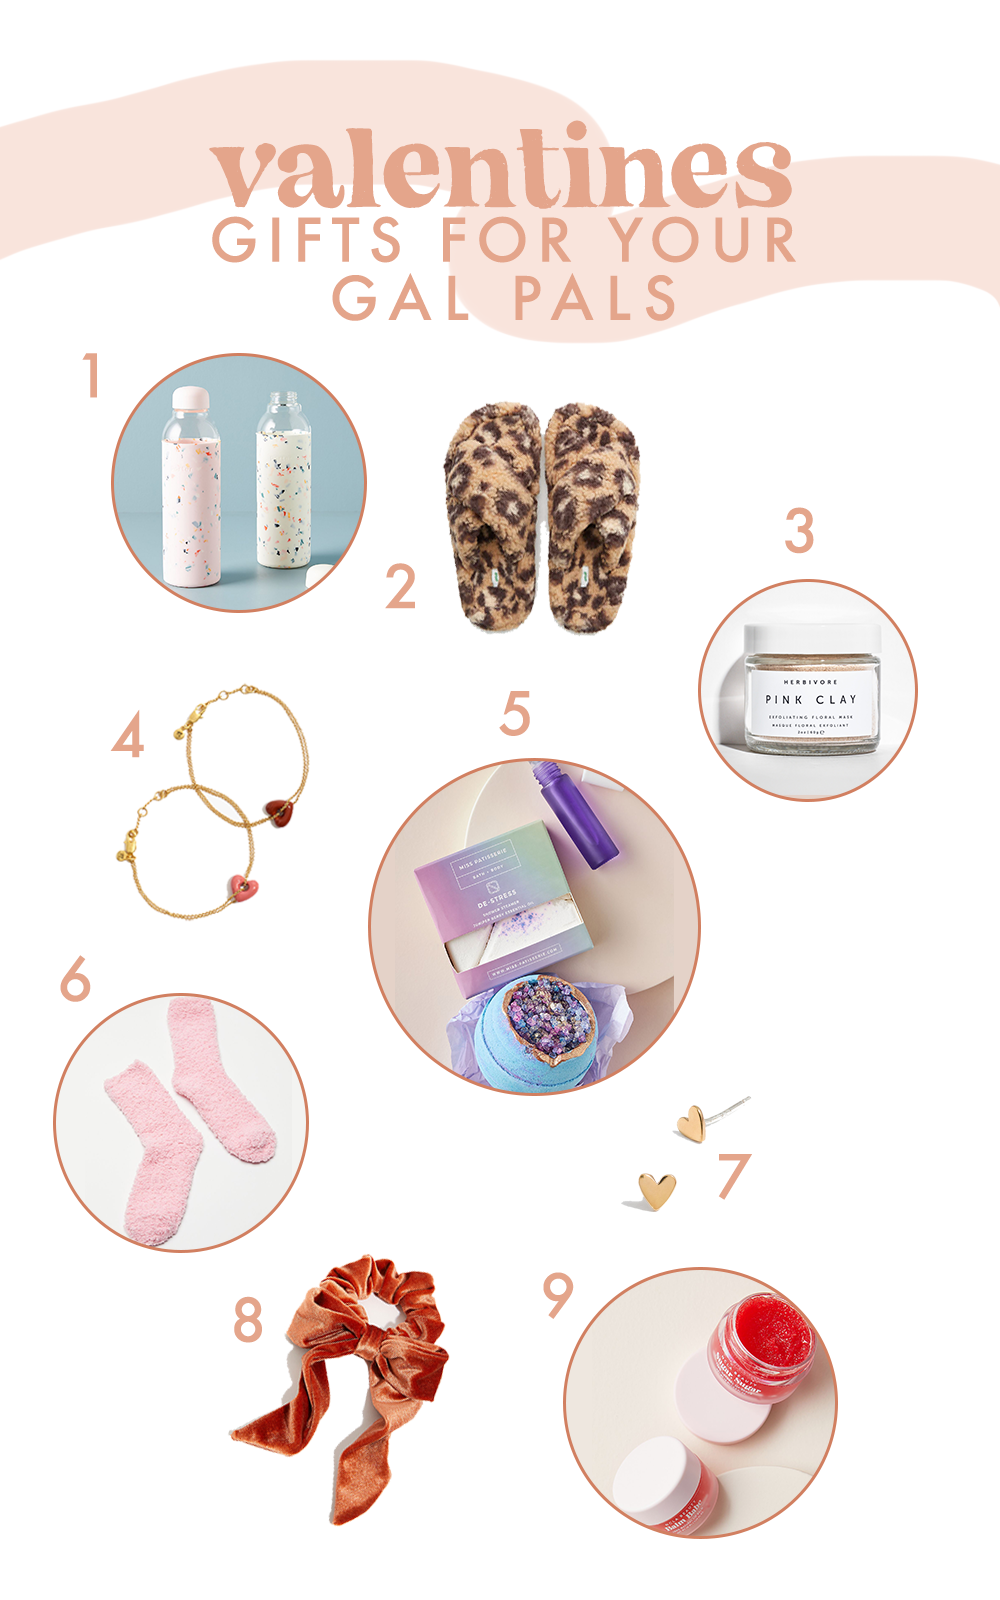 Valentine's Gift Guide for your Gal Pals